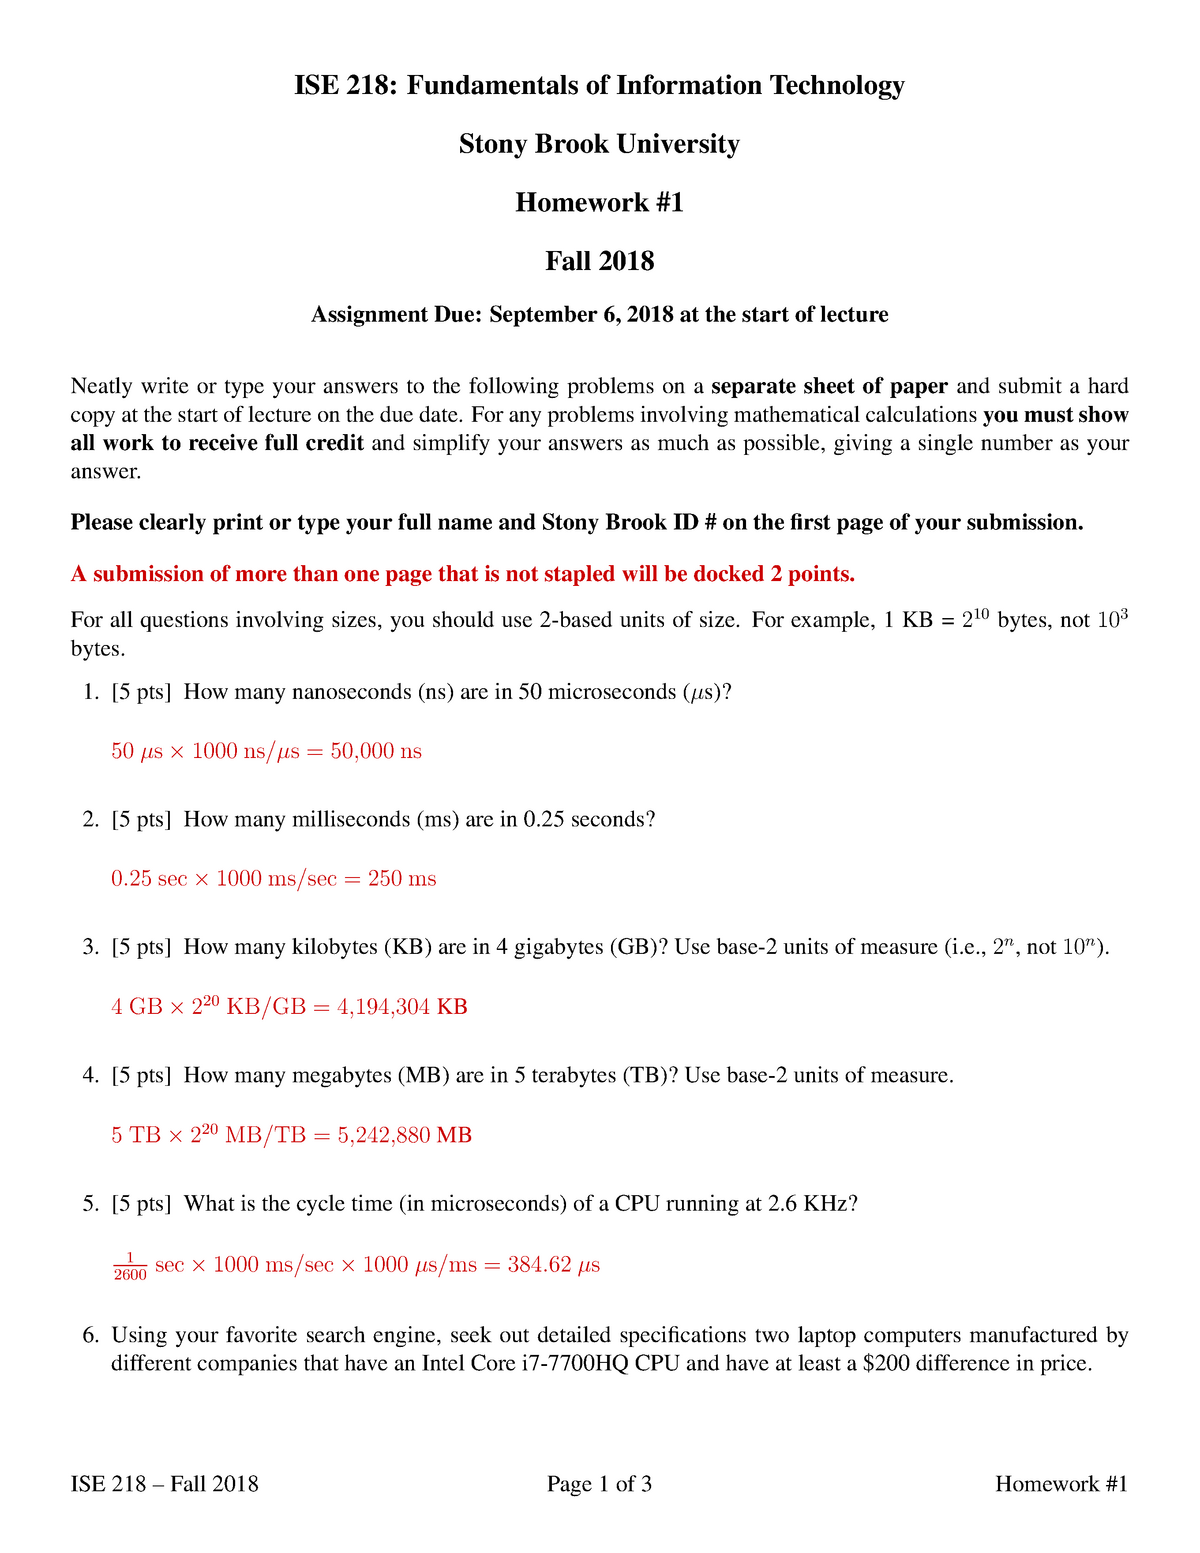 ISE218 Homework 1 Answers ISE 218 Fundamentals of Information